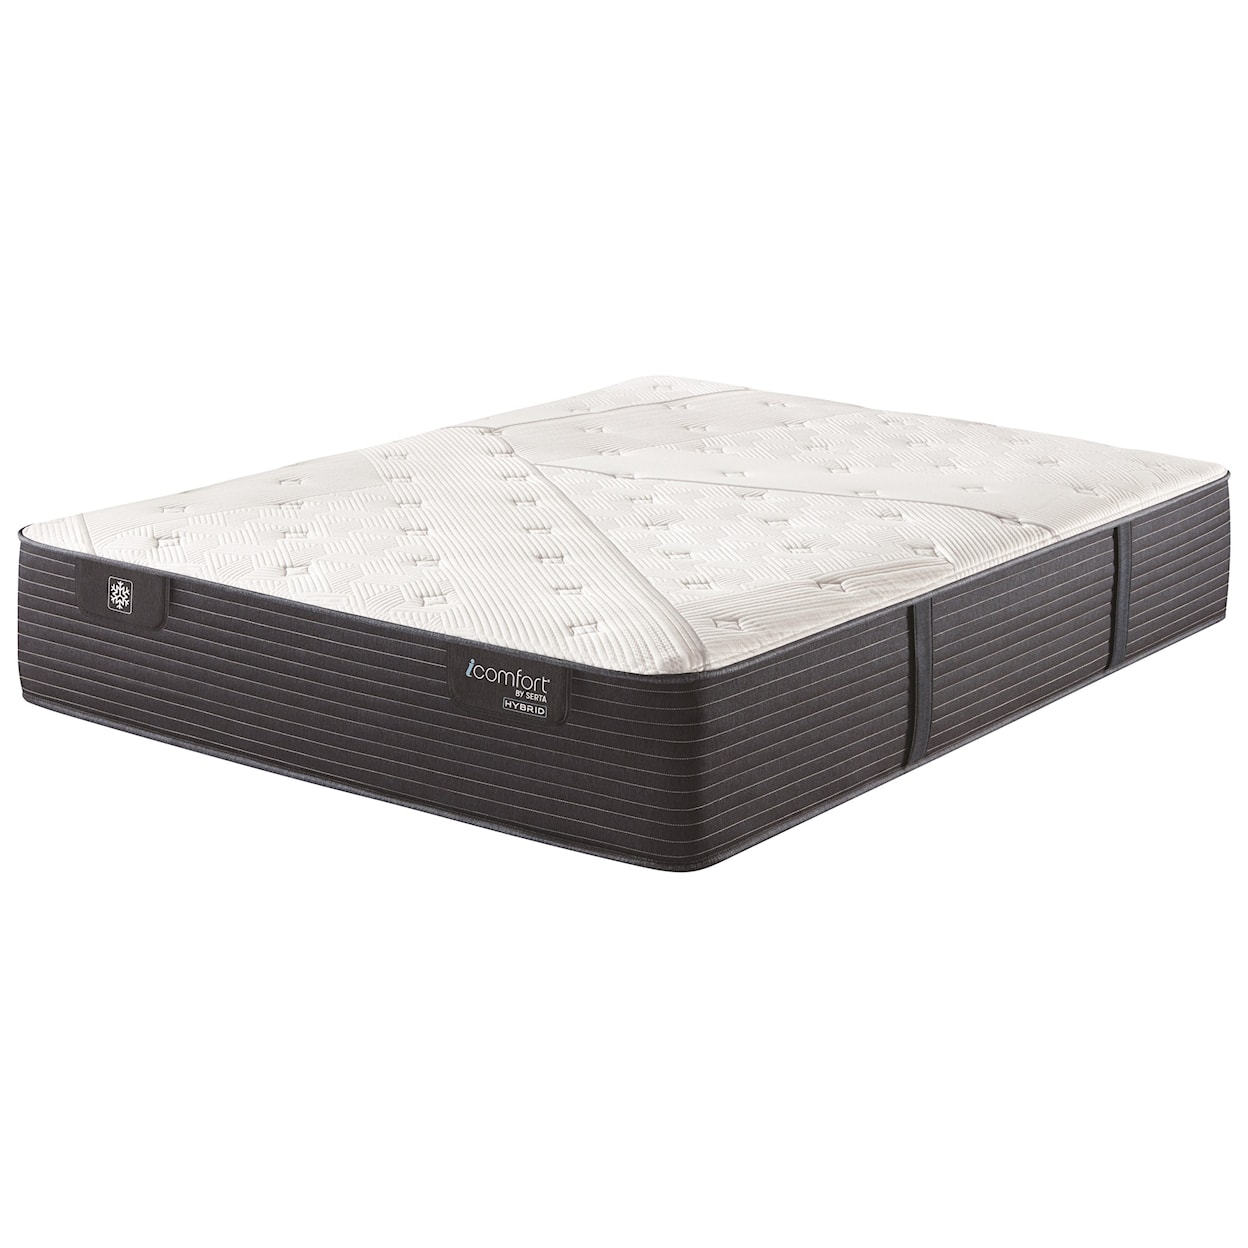 Serta CF1000 Quilted Hybrid II Firm Full 13" Firm Quilted Hybrid Mattress